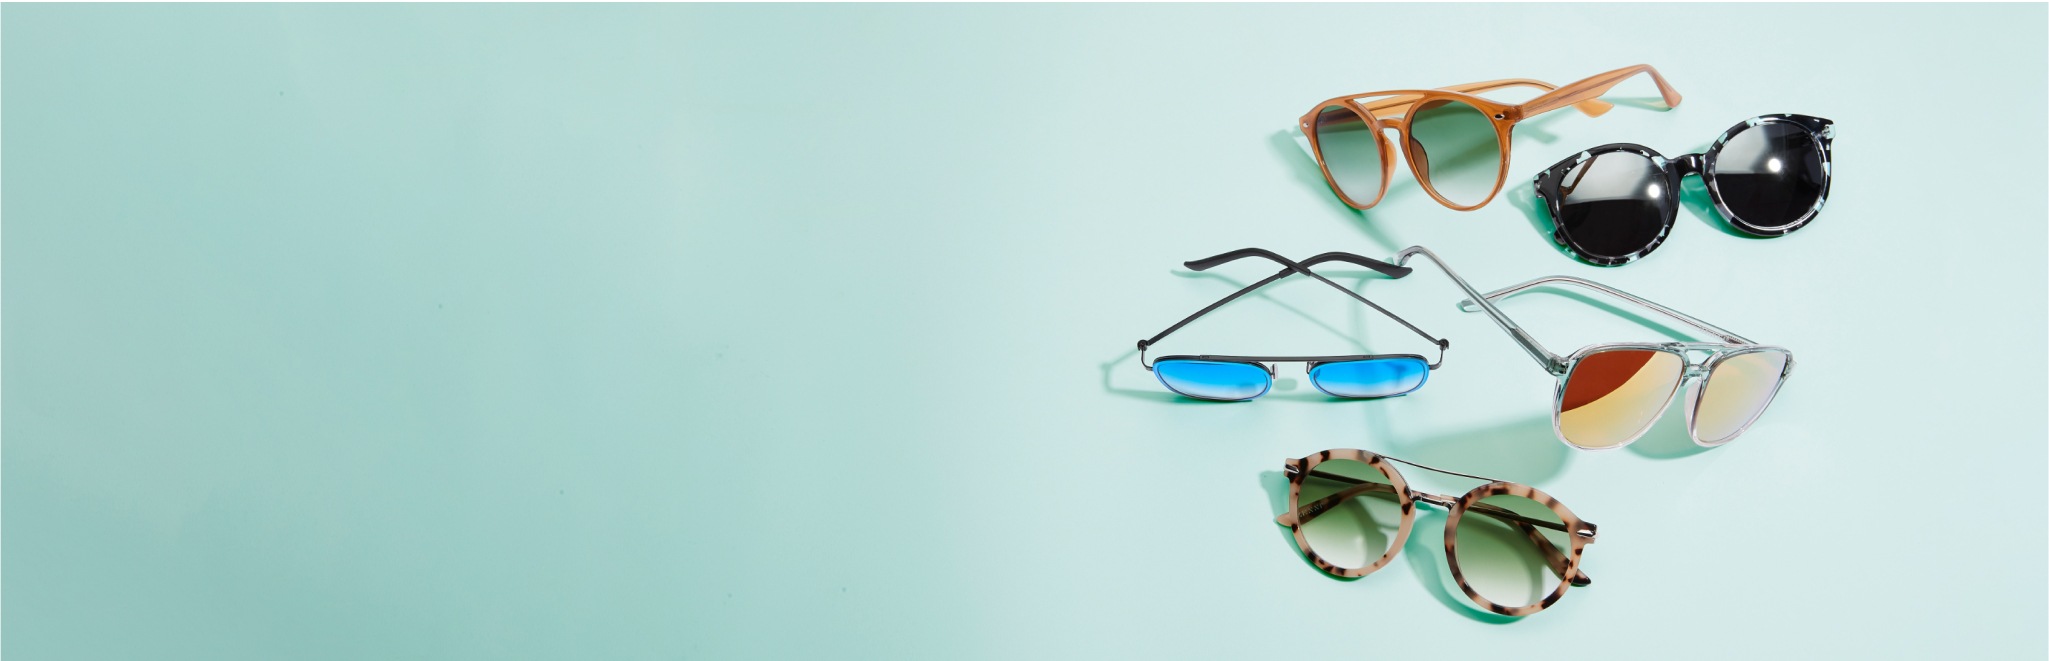 Teal background with 5 sunglasses: brown with ombre lenses, black tortoiseshell with dark grey lenses, black aviators with blue mirror lenses, transparent aviators with gold mirror lenses, and tortoiseshell with ombre lenses.